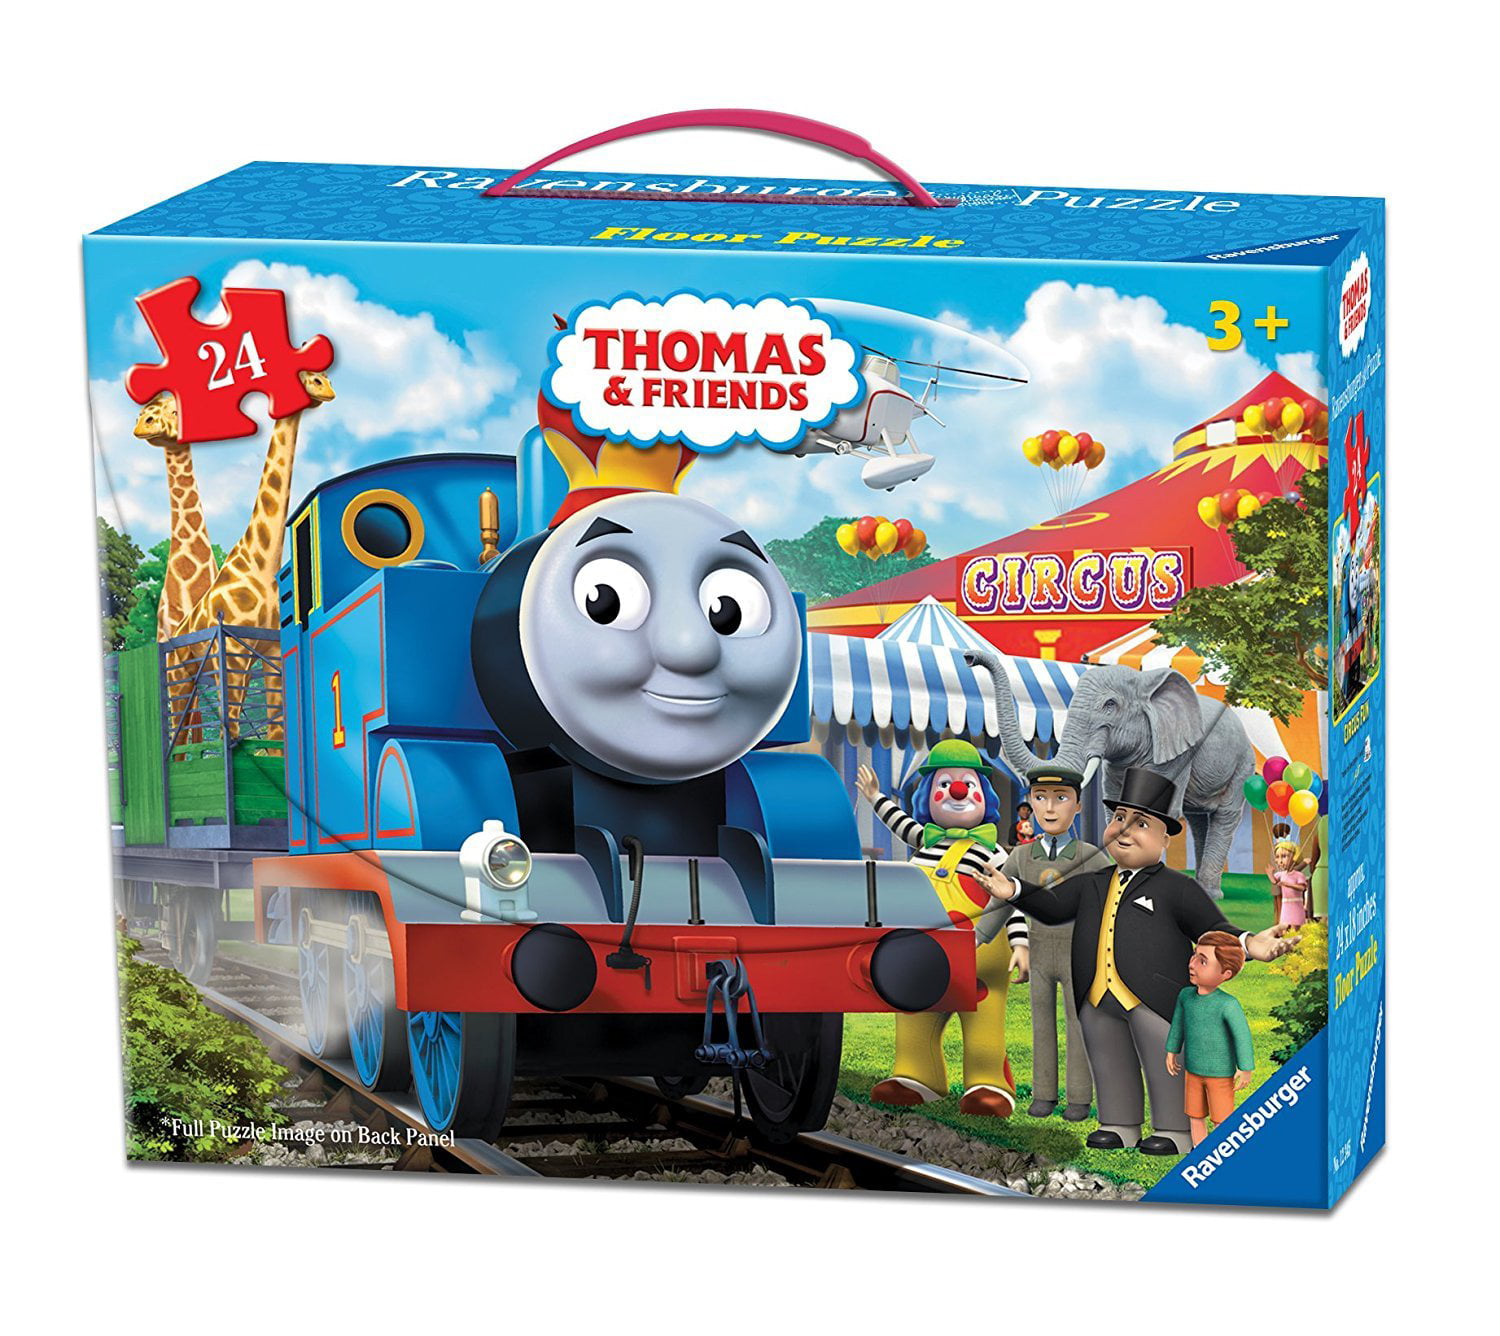 & 5 PIECE JIGSAW PUZZLES CHILDRENS THOMAS & FRIENDS MY FIRST PUZZLE 2 3 4 